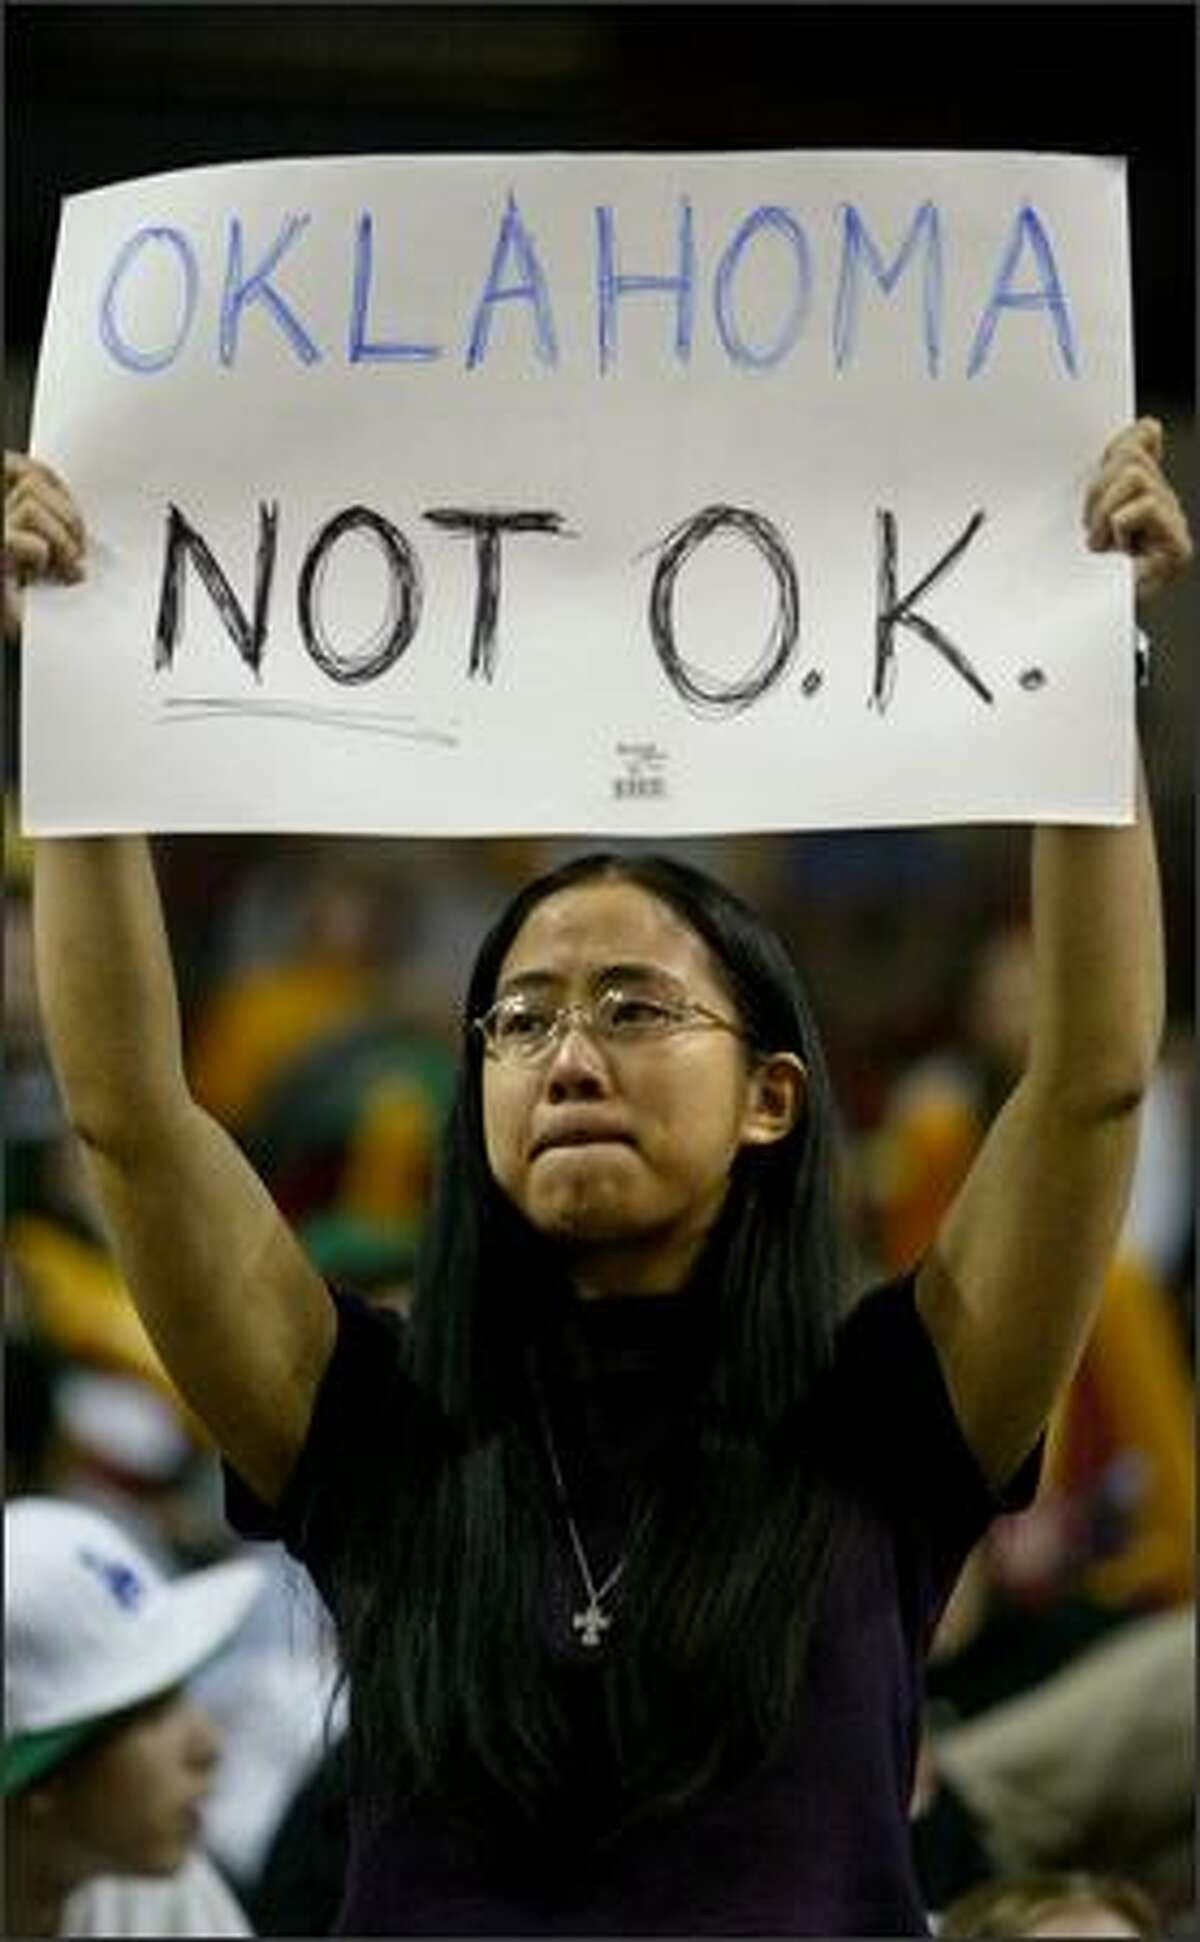 Seattle Storm season ticket holder Becky Chow holds up a sign protesting the sale of the team and the Seattle SuperSonics as other fans cheer during a game against the Sacramento Monarchs. The Monarchs won, 74-61.